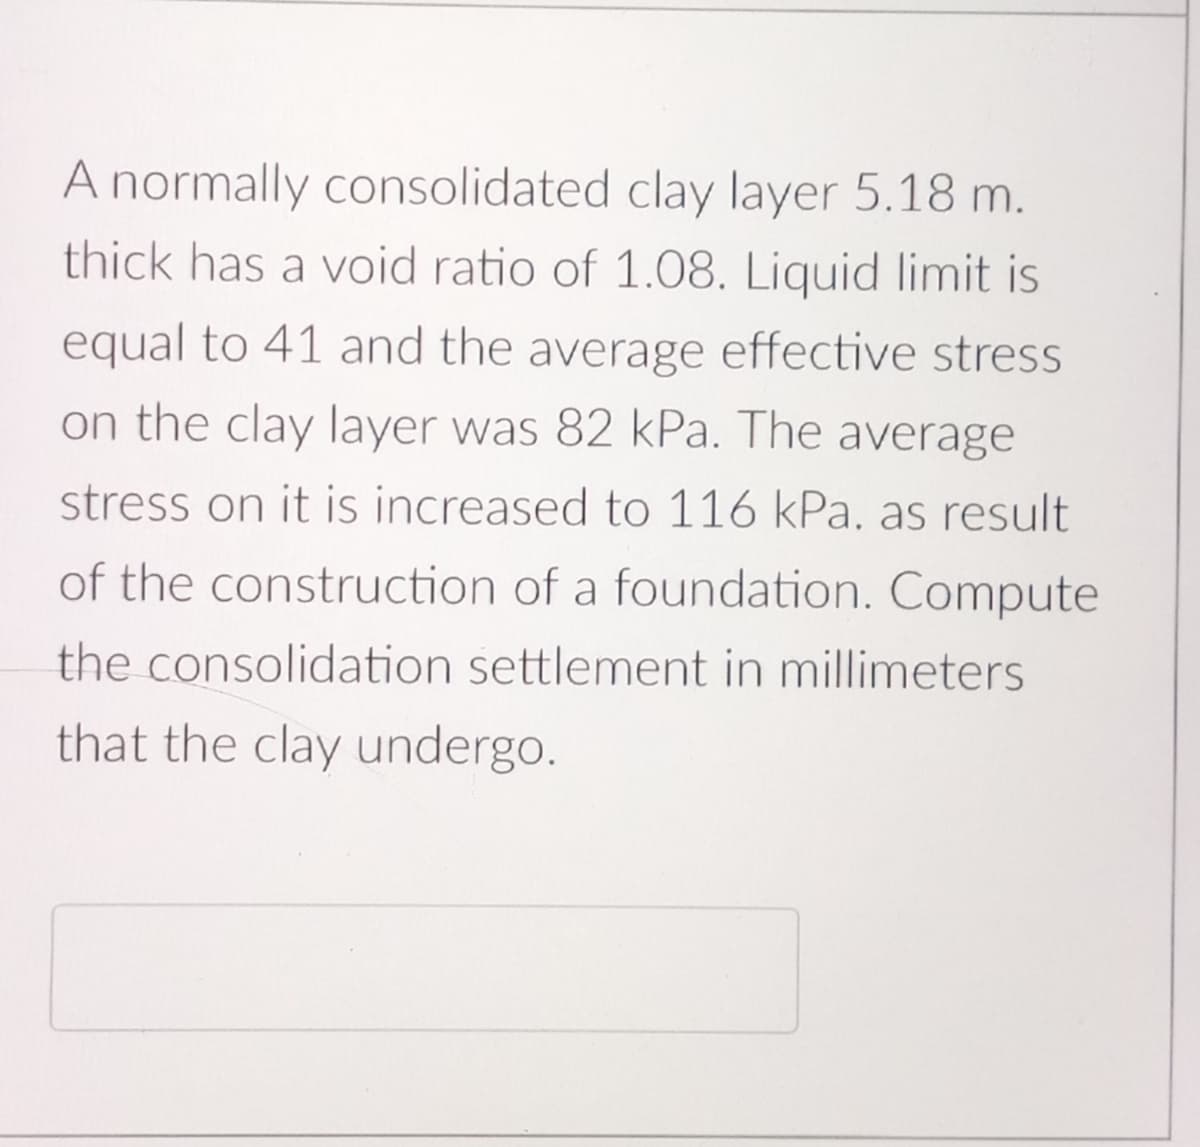 A normally consolidated clay layer 5.18 m.
thick has a void ratio of 1.08. Liquid limit is
equal to 41 and the average effective stress
on the clay layer was 82 kPa. The average
stress on it is increased to 116 kPa. as result
of the construction of a foundation. Compute
the consolidation settlement in millimeters
that the clay undergo.